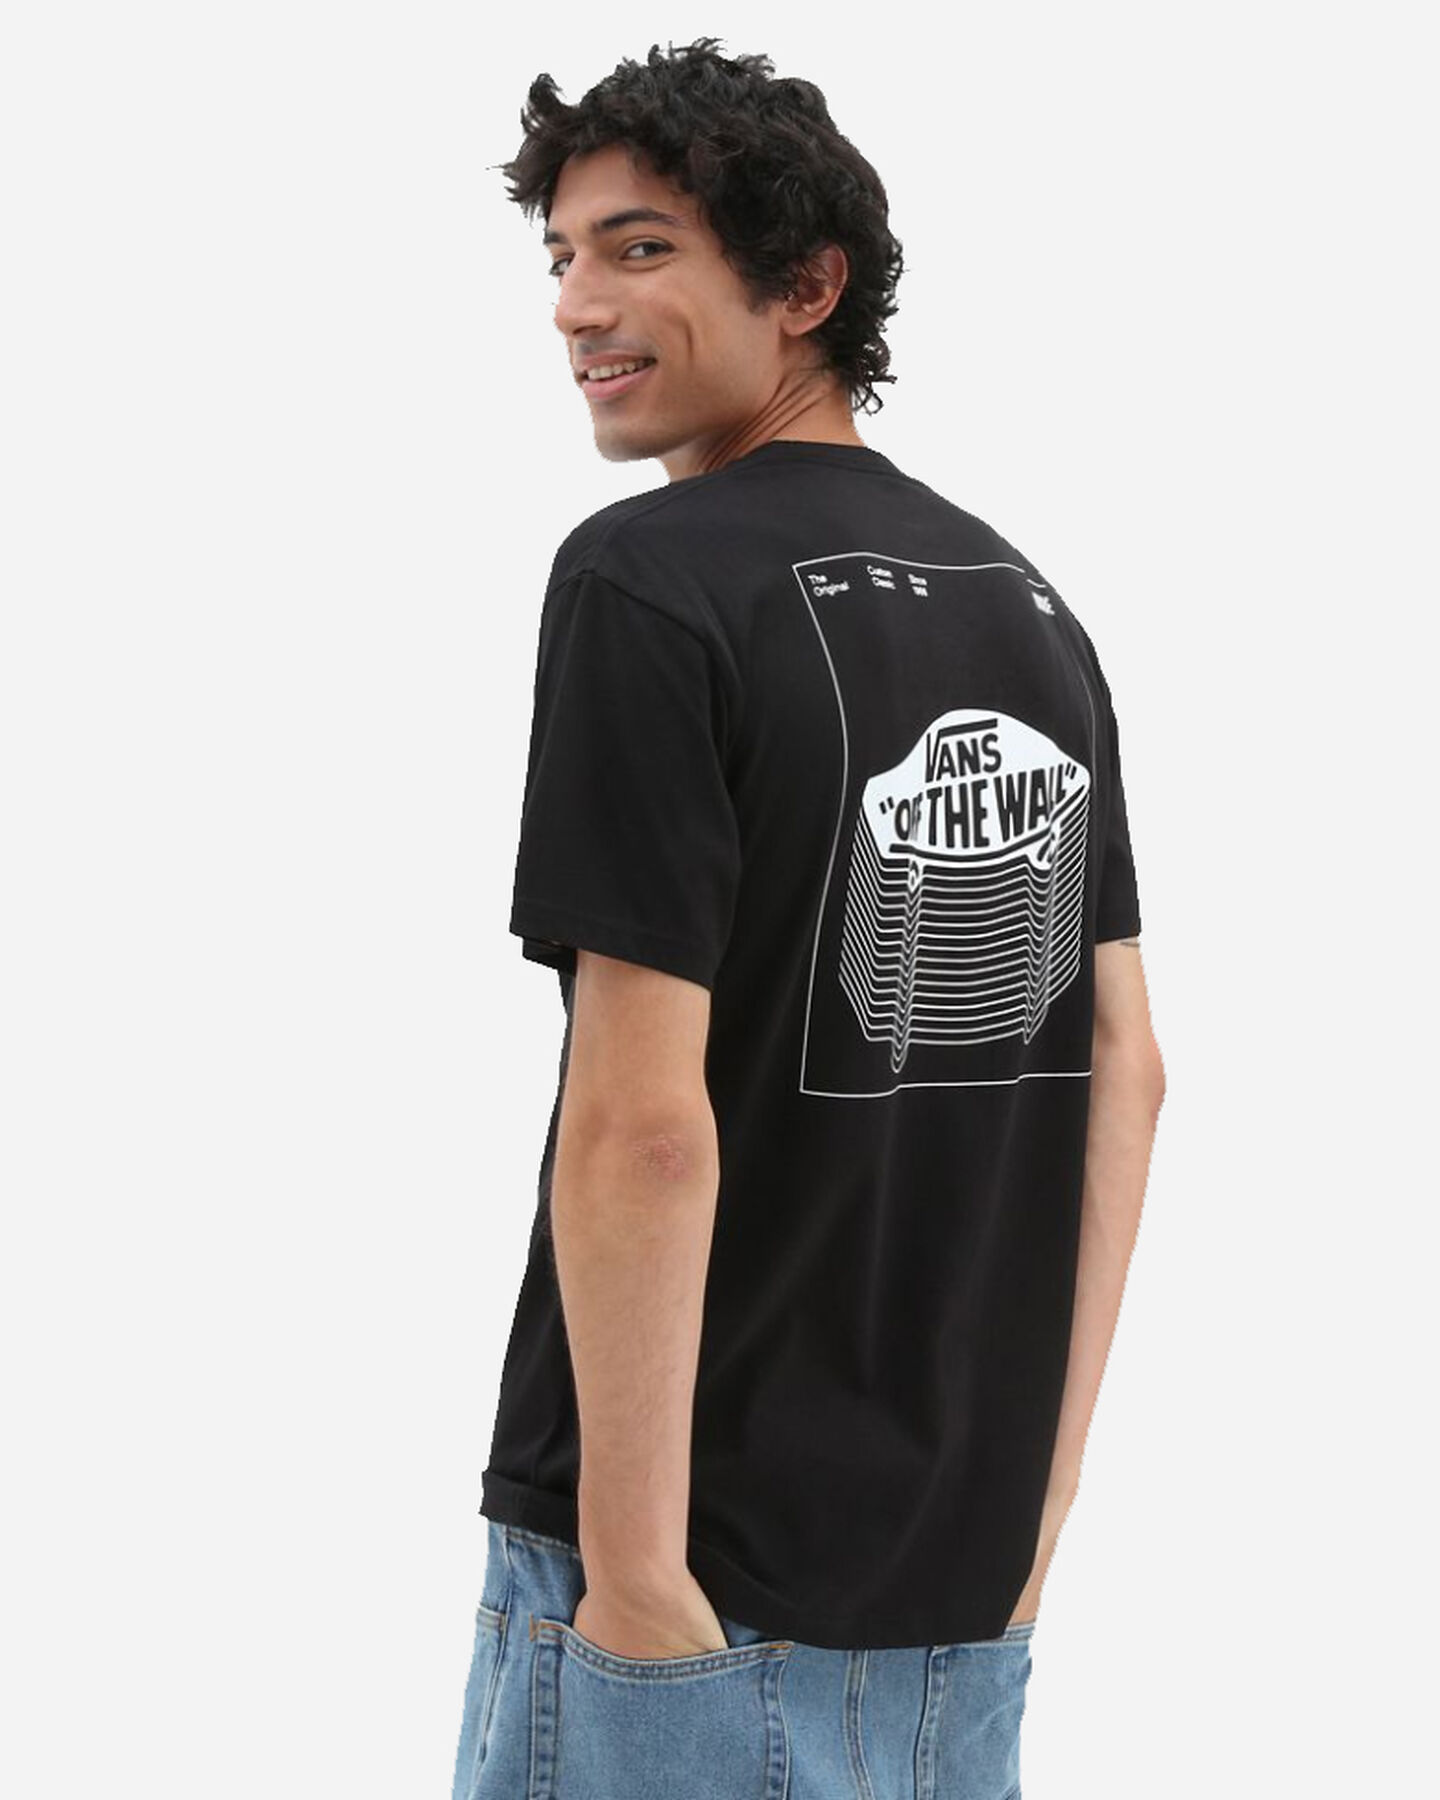  T-Shirt VANS TRANSFIXED M S5555694|BLK|XS scatto 1